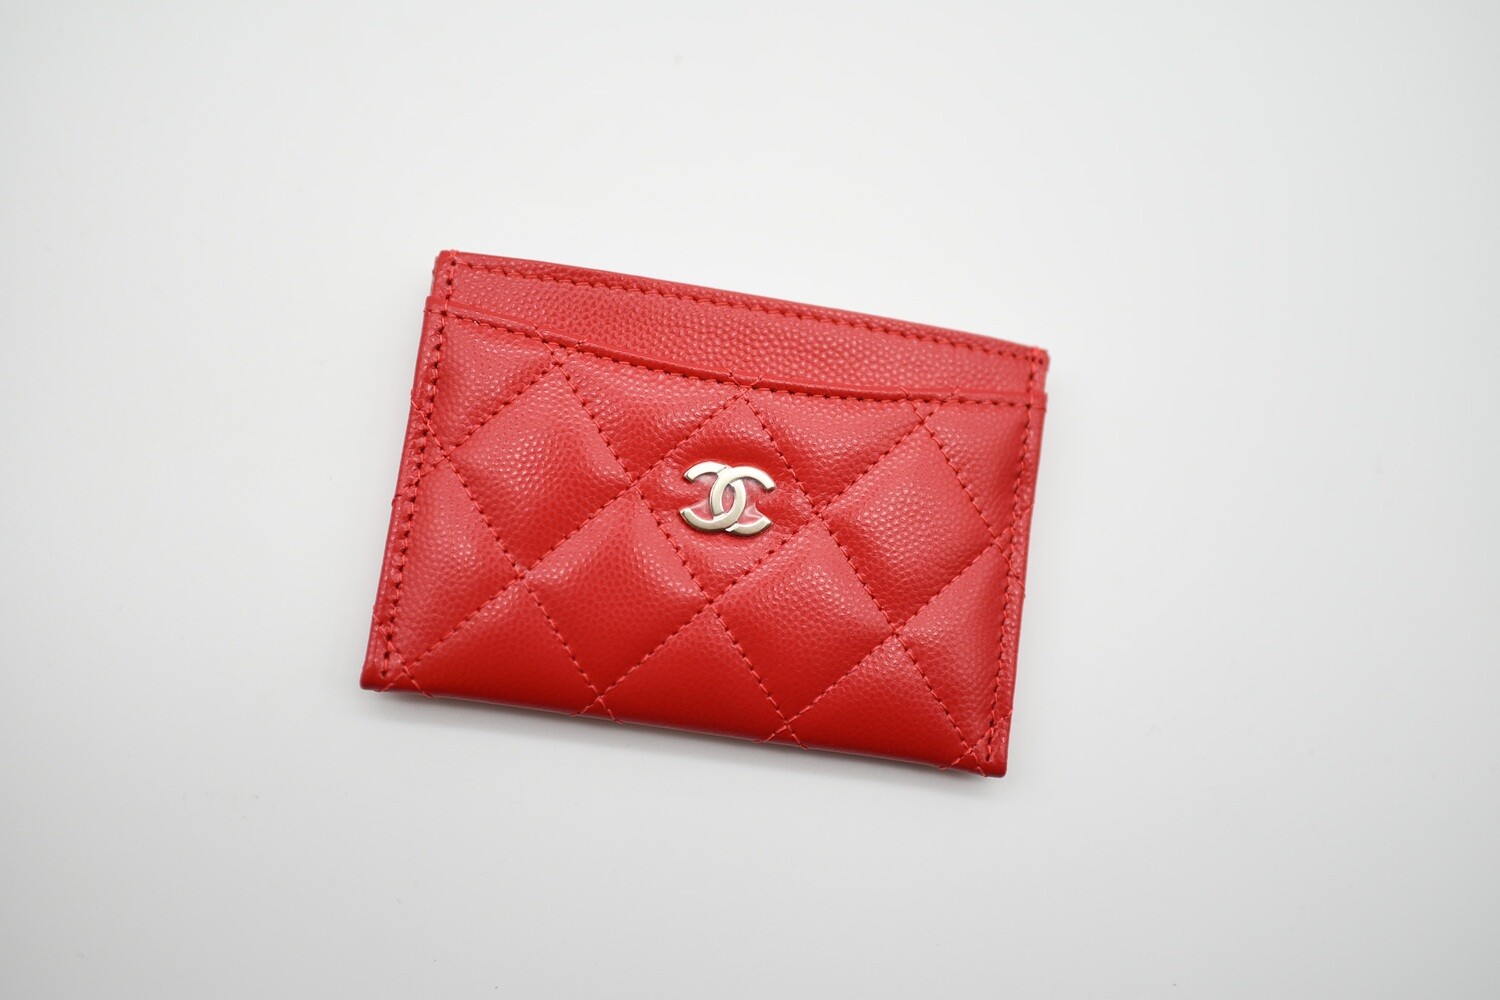 Chanel Flat Card Holder, 22S Red Caviar with Gold Hardware, New in Box GA006